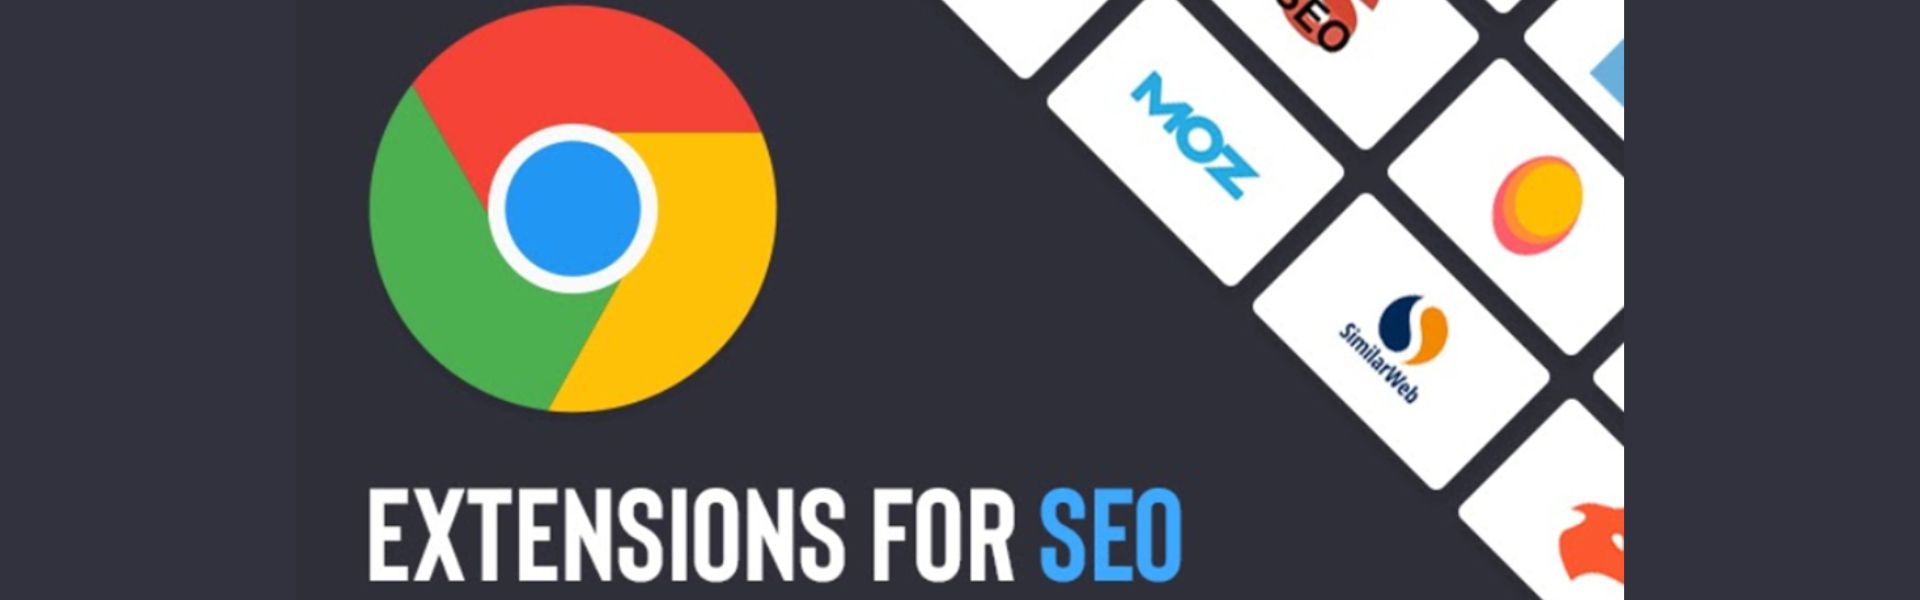 12 Best Chrome Extensions for SEO [Recommended by Experts]